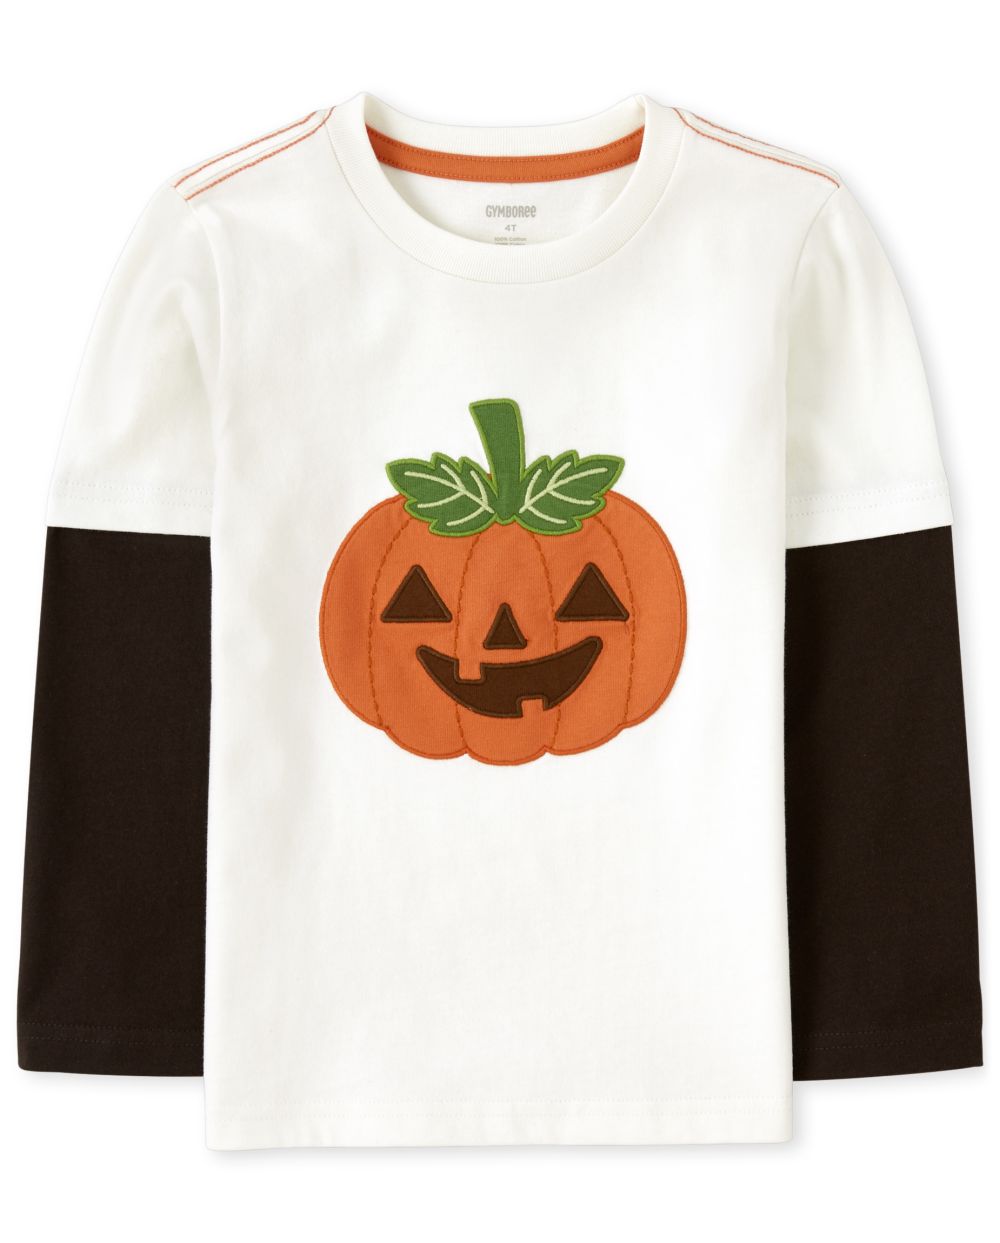 matching sibling fall outfits, white love sleeve shirt with a pumpkin